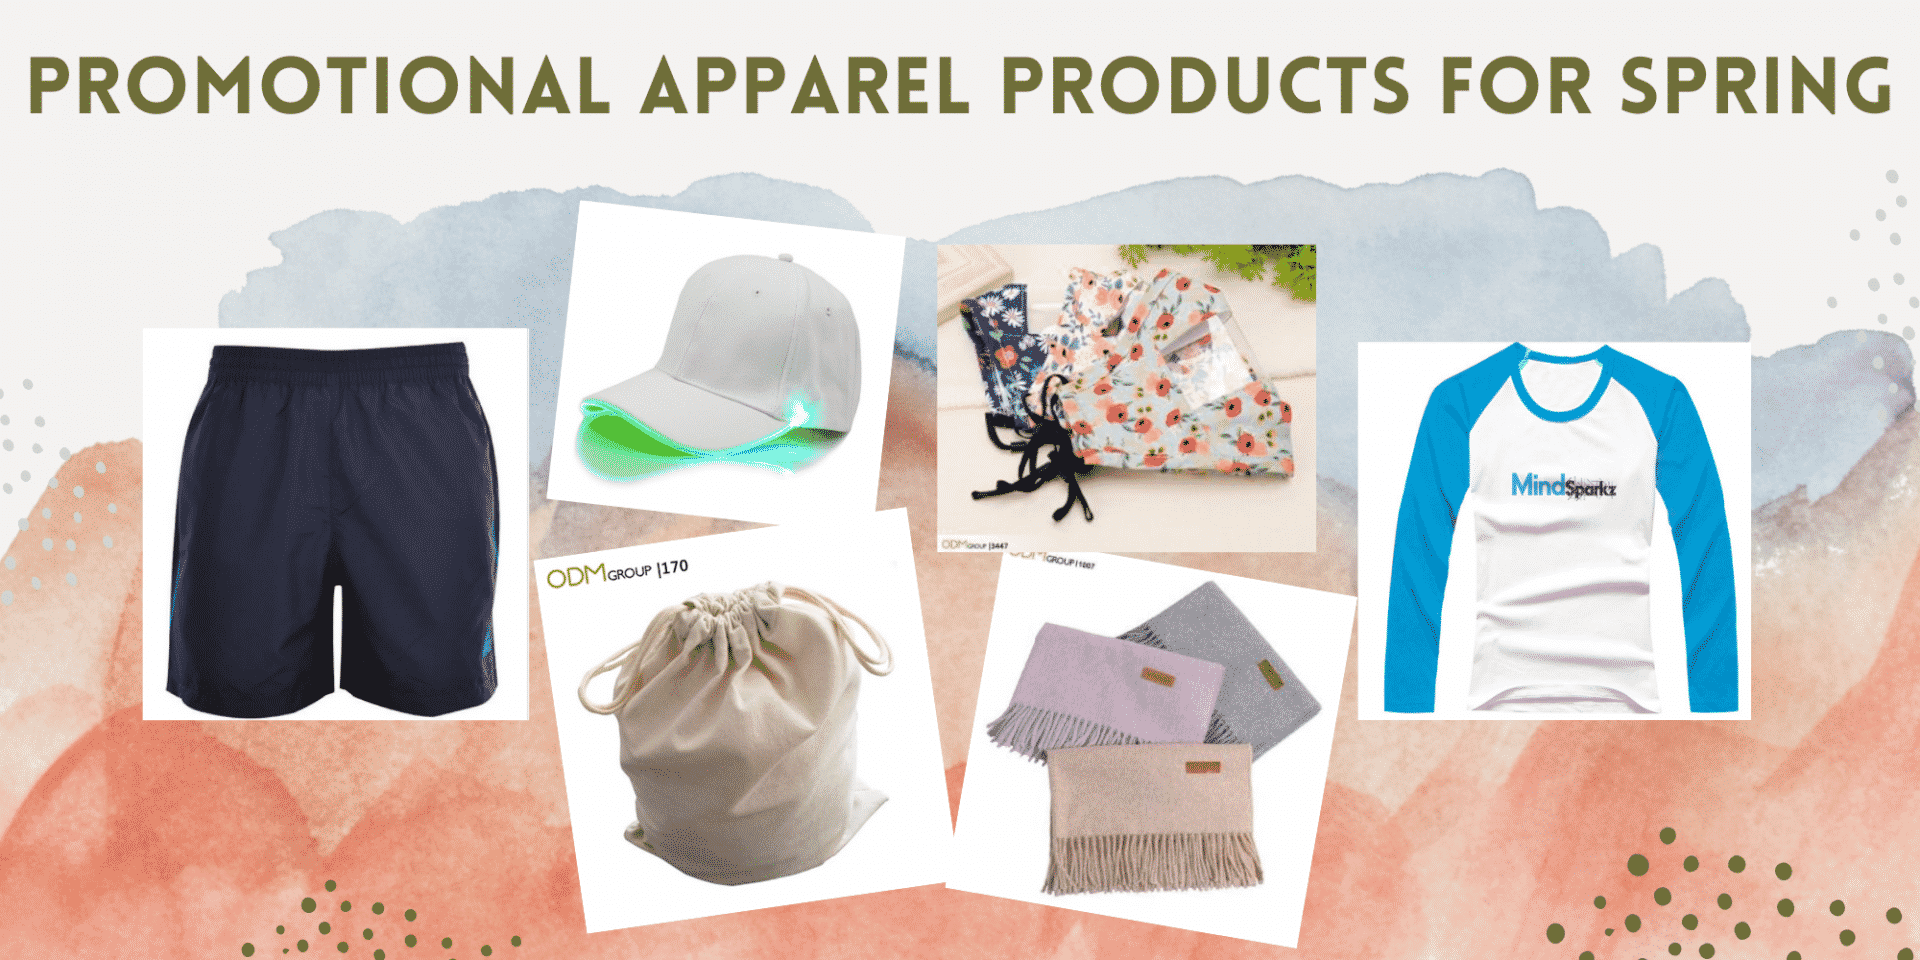 Top 10 Promotional Apparel Products to Spring Your Brand Forward!